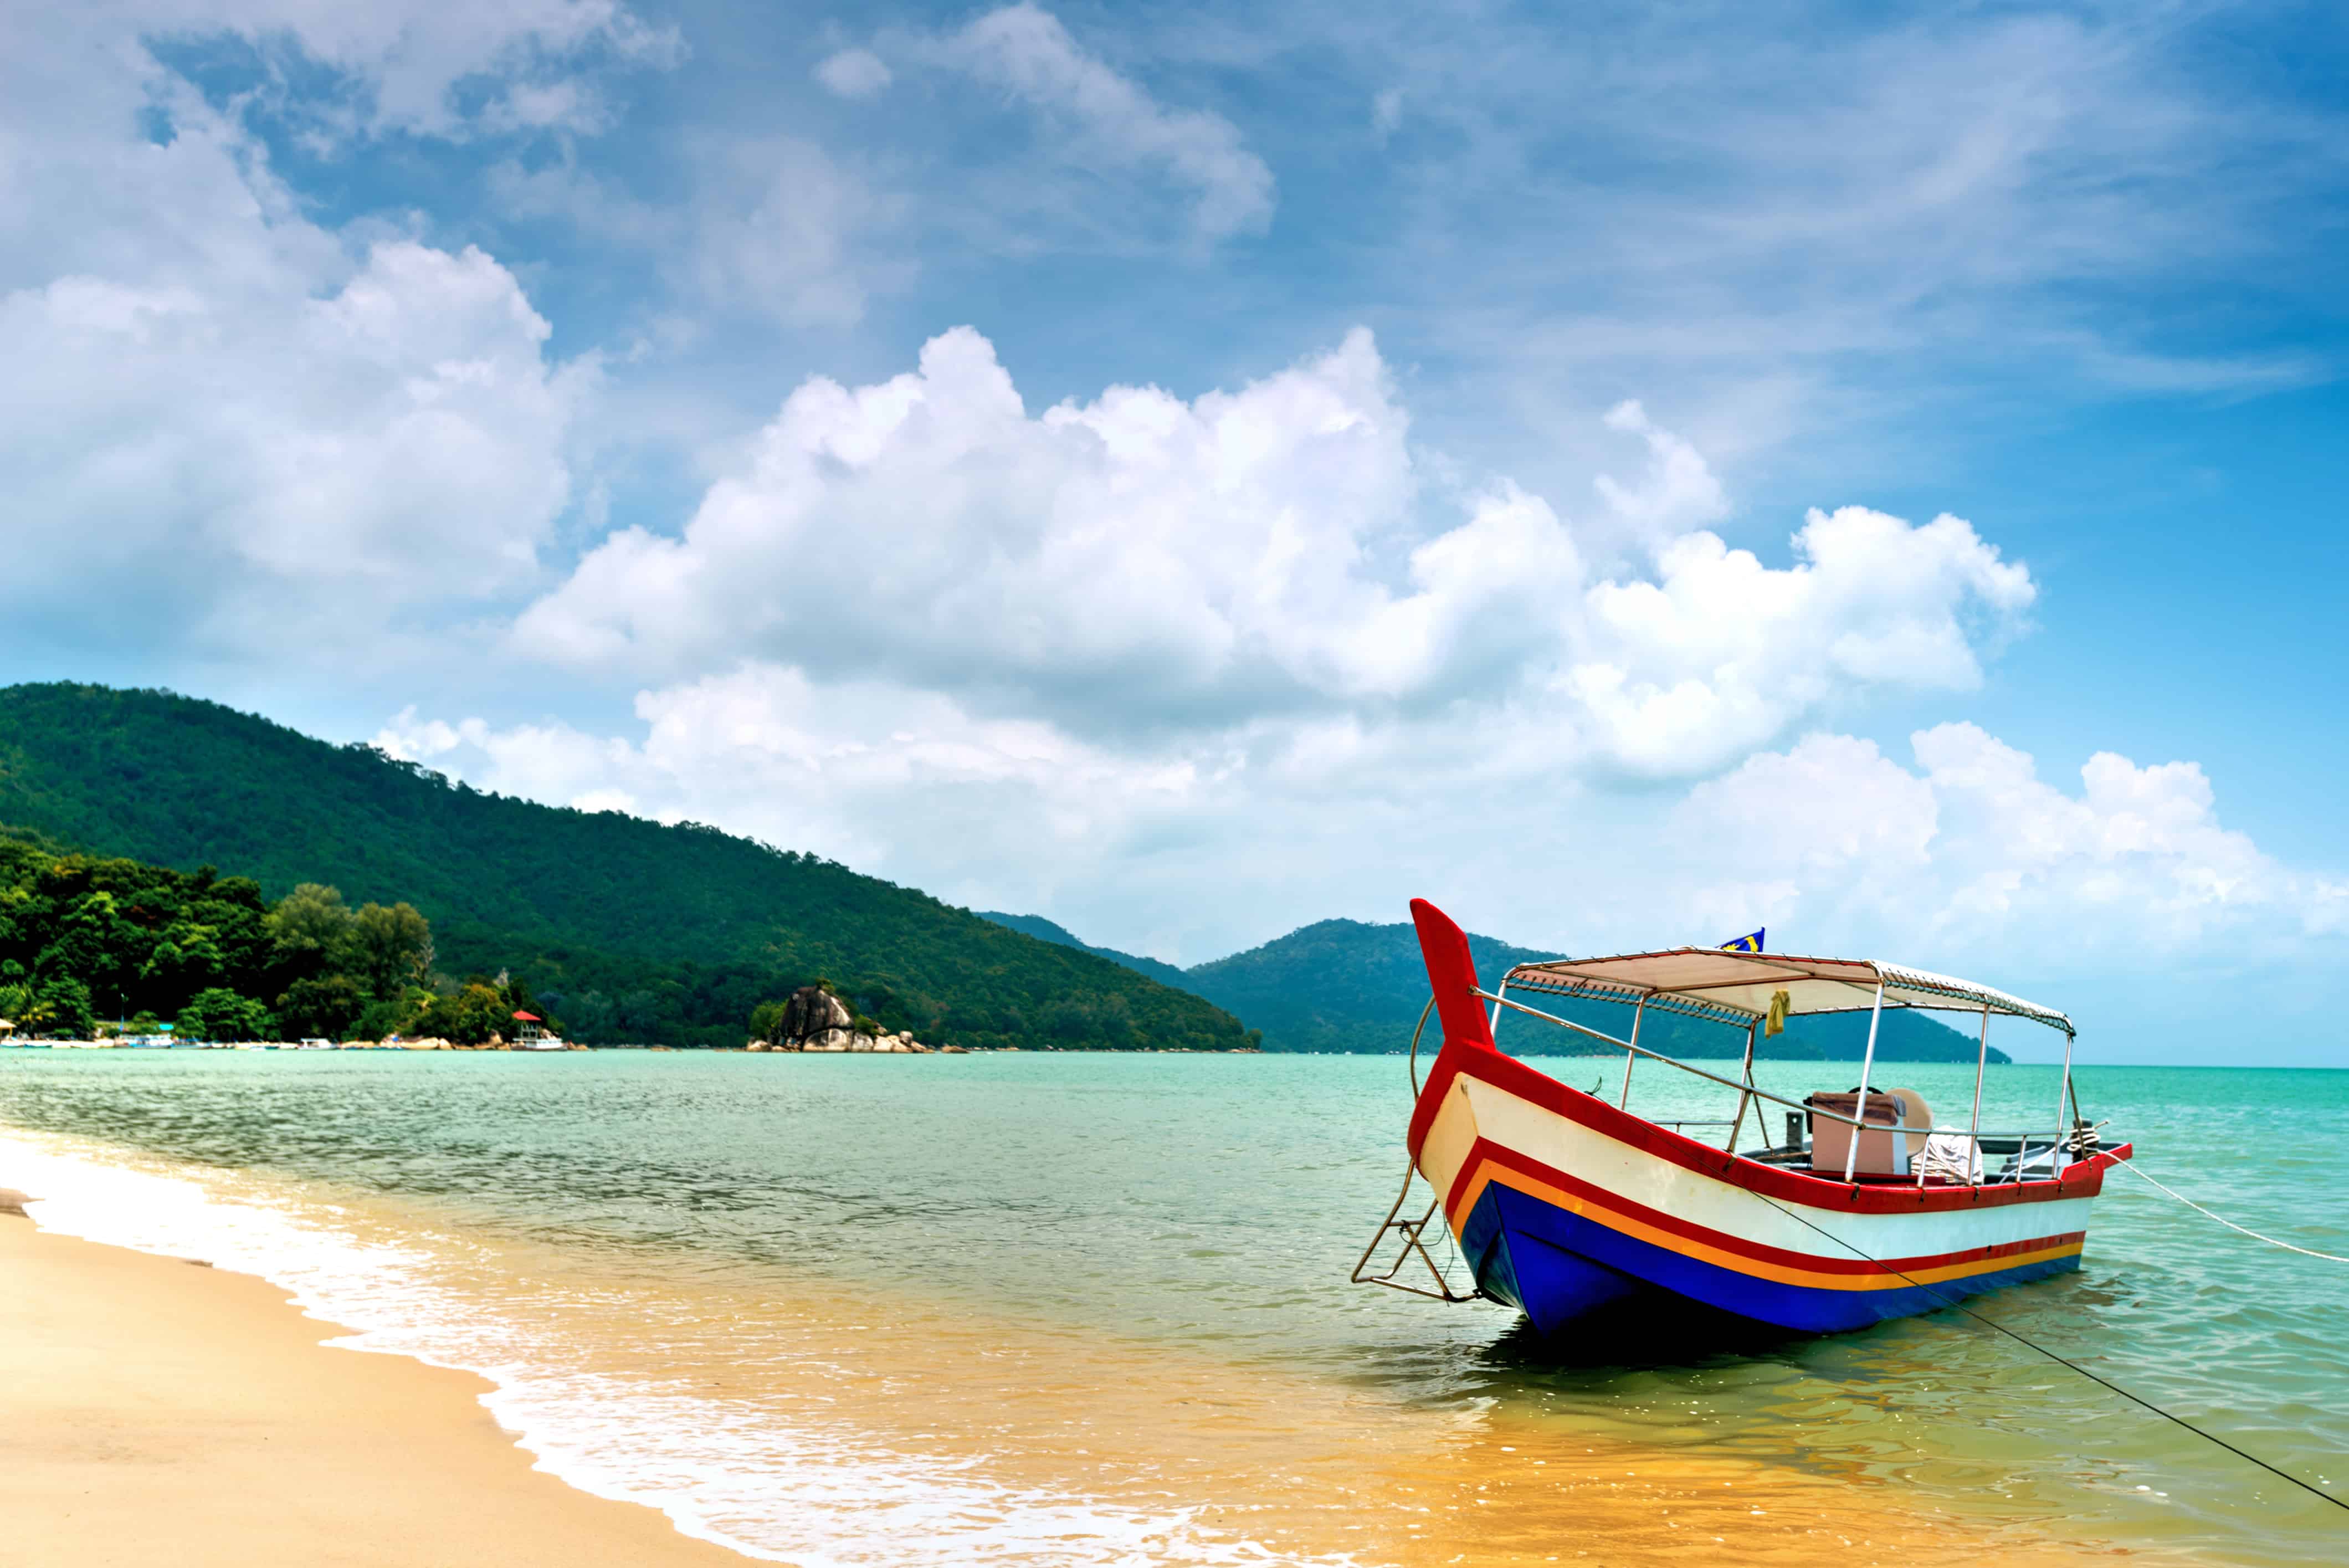 This image shows a Beach Scene in Penang, Malaysia – ILSI Southeast